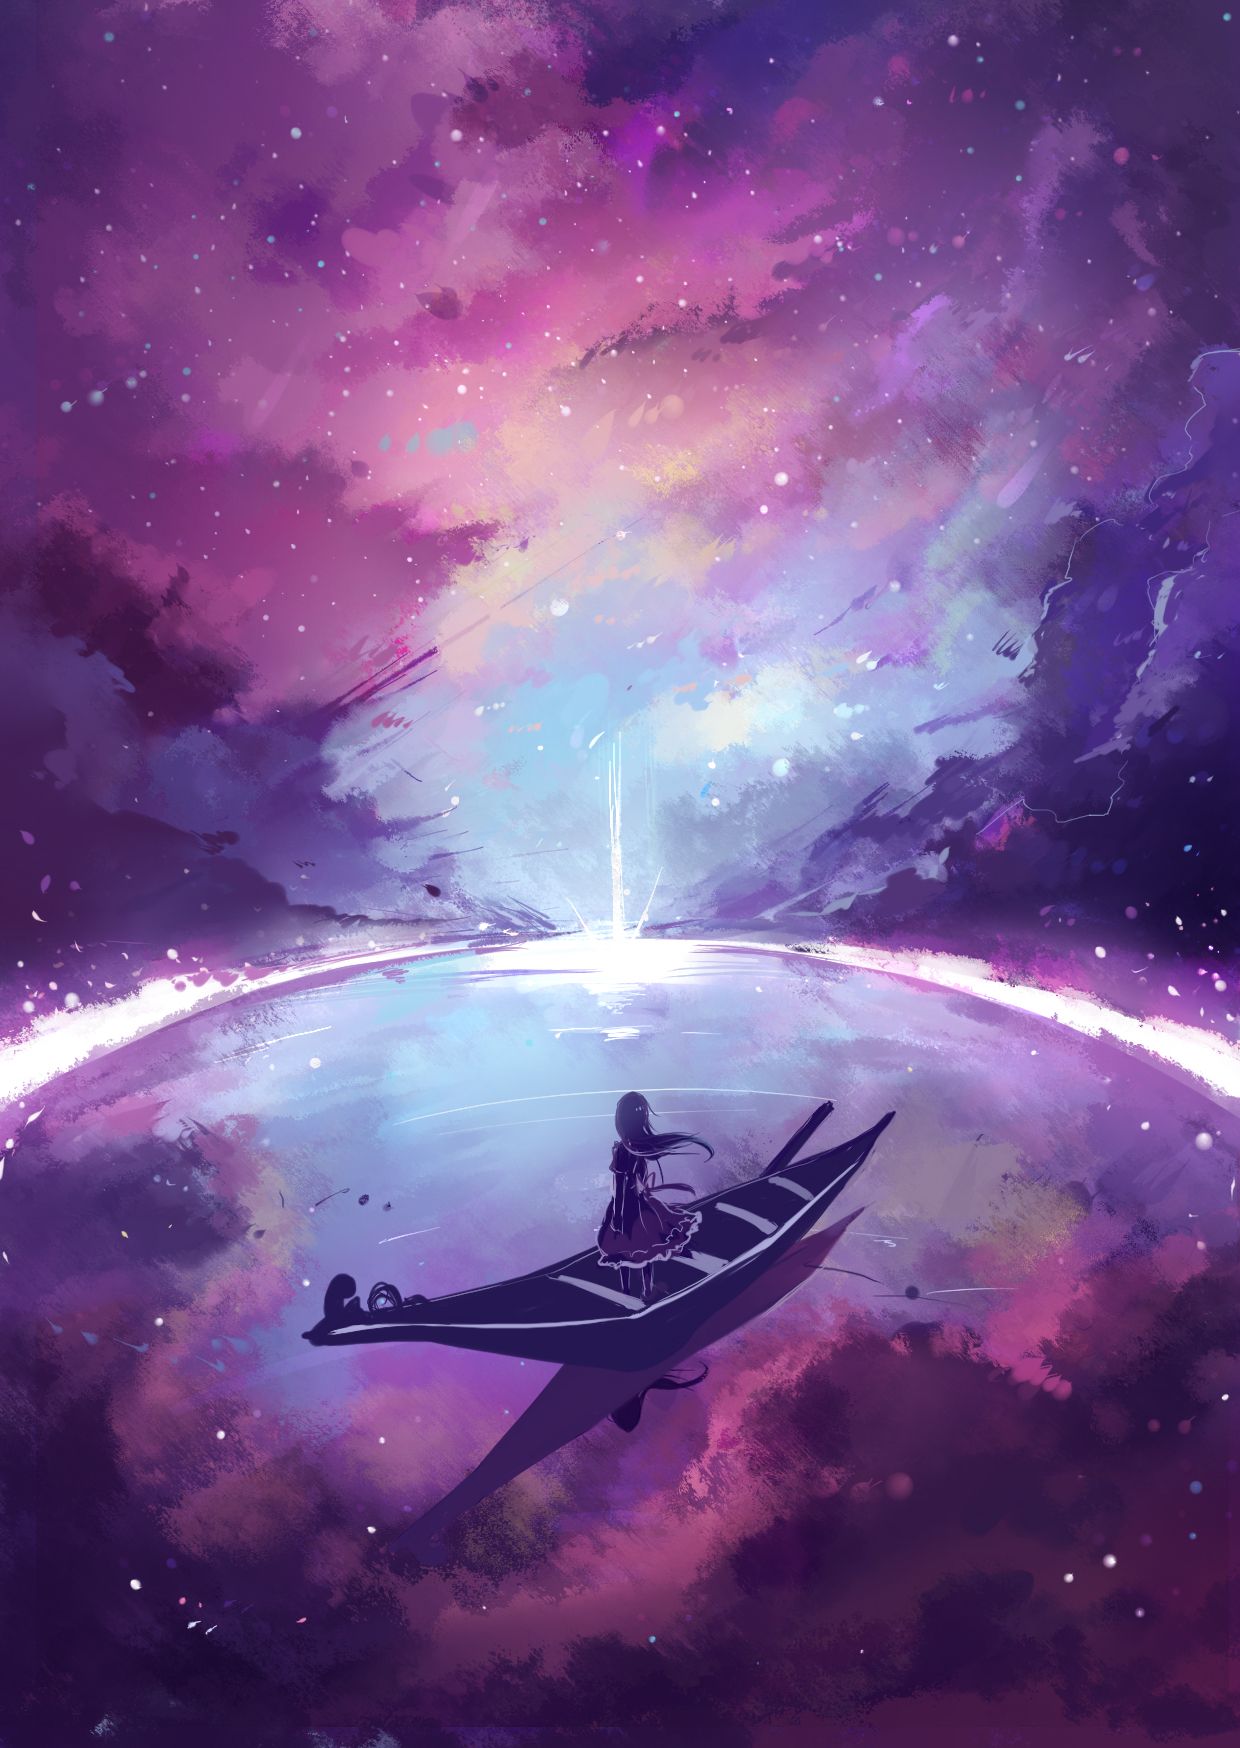 Anime.scenery.girl.boat.GalaxySpace.cool.illustration. Abstract art prints, Anime scenery, Psychedelic illustration